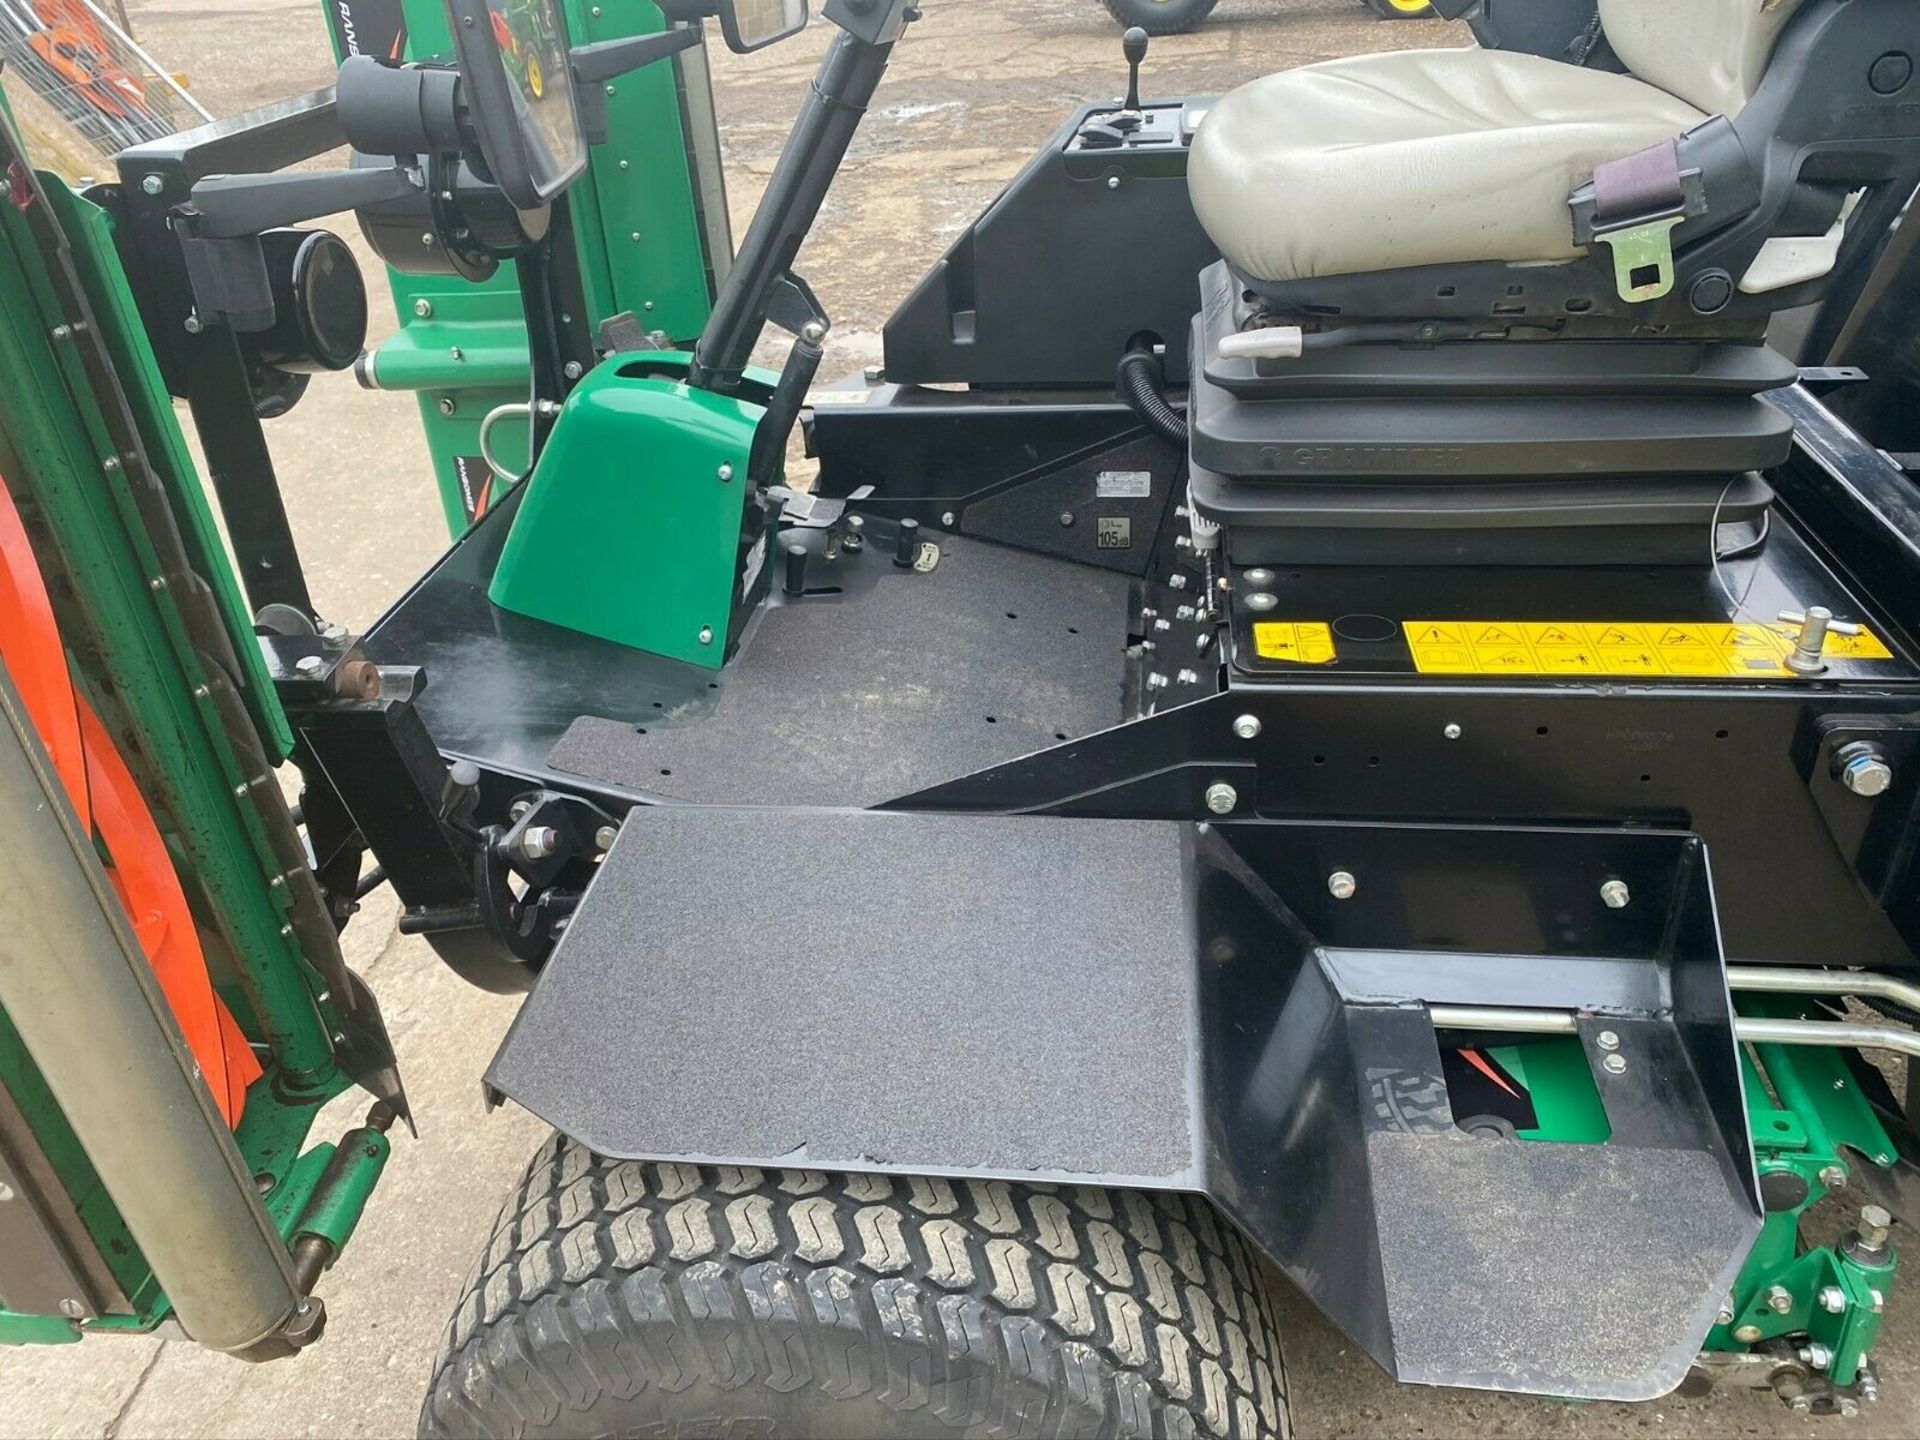 IMMACULATE! RANSOMES PARKWAY 3 TRIPLE CYLINDER MOWER, ONLY 953 HOURS, YEAR 2015, NEW CYLINDERS ETC - Image 8 of 10